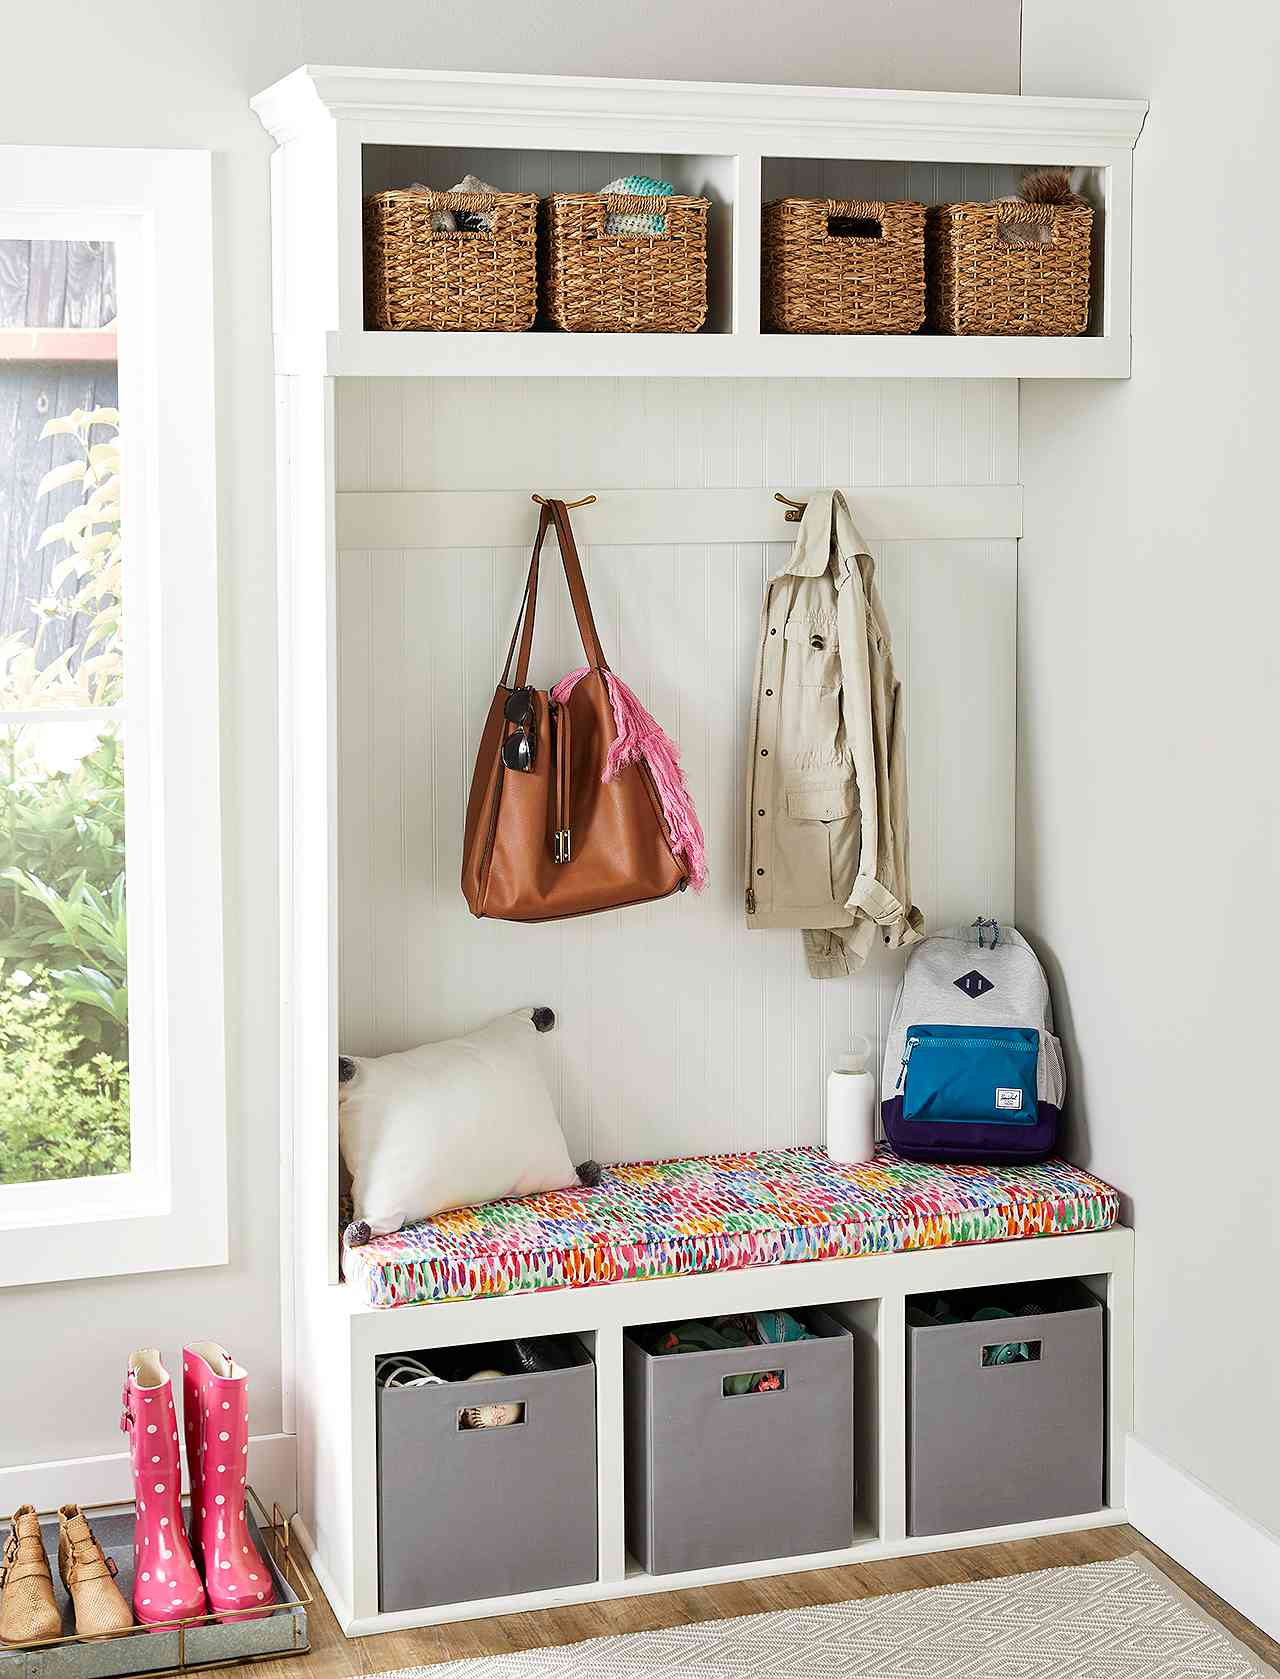 How To Build A Mudroom Bench Better, Mudroom Shelving Units